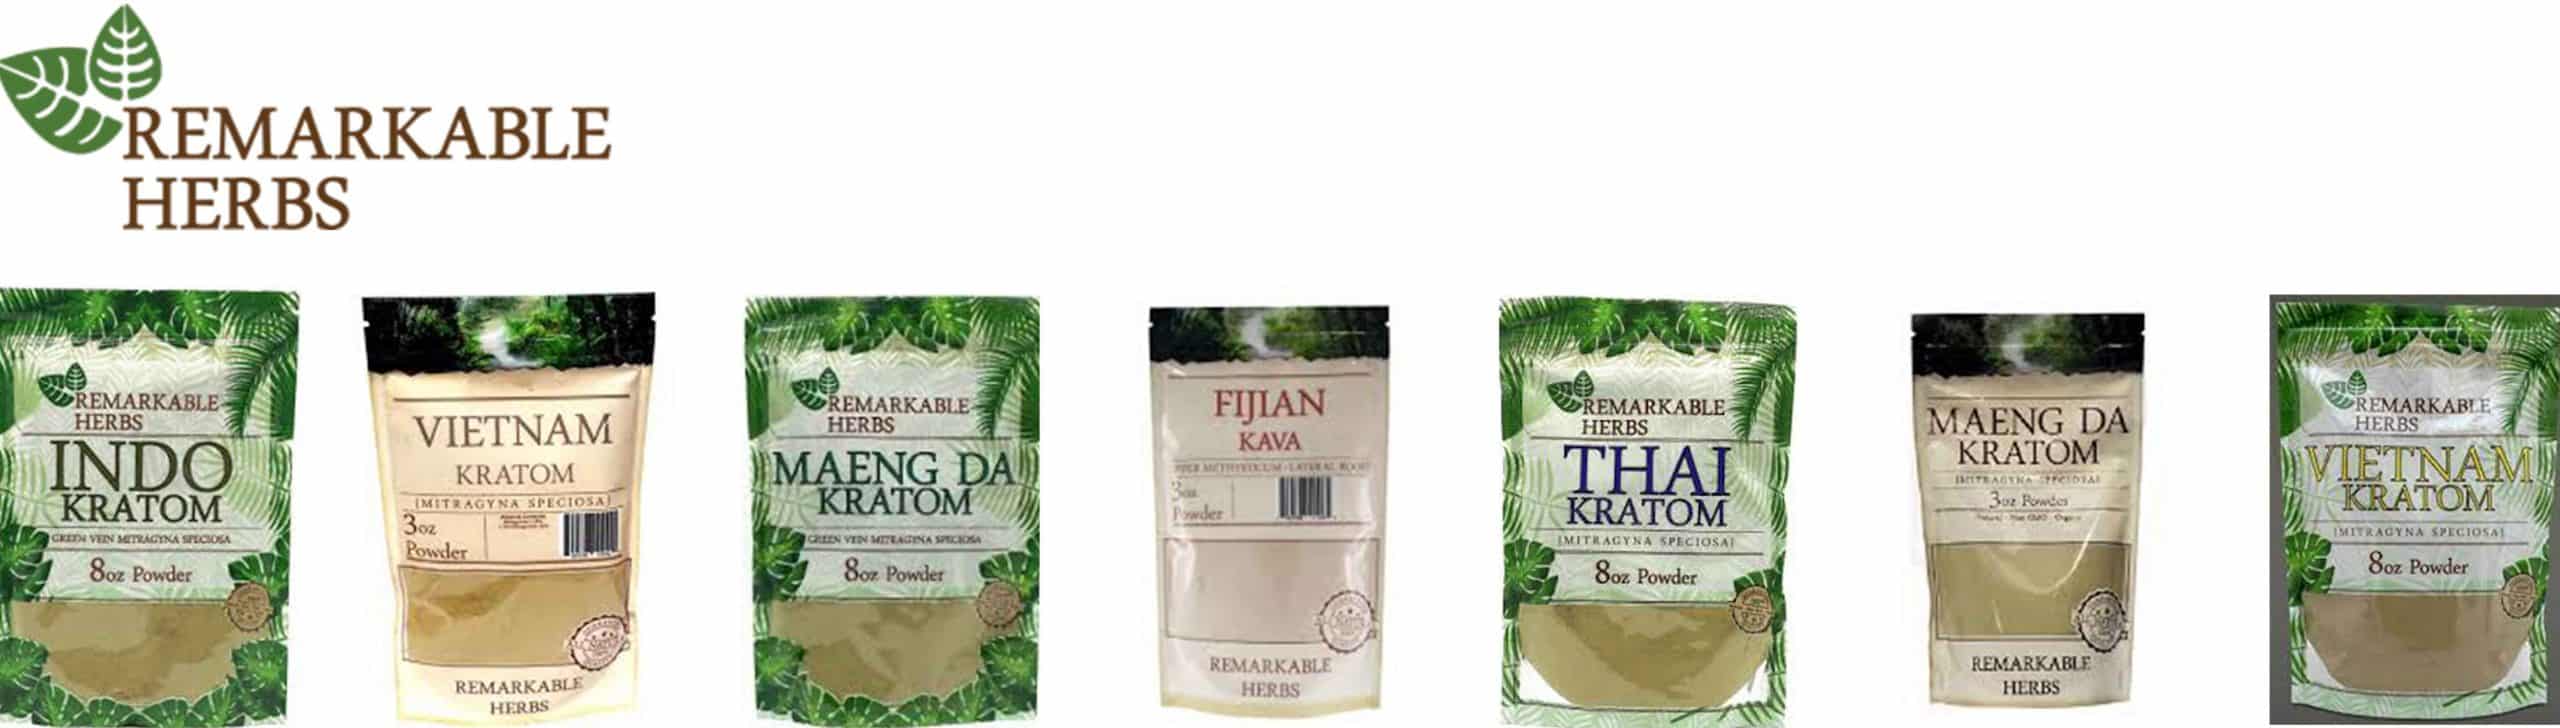 image of remarkable herbs products